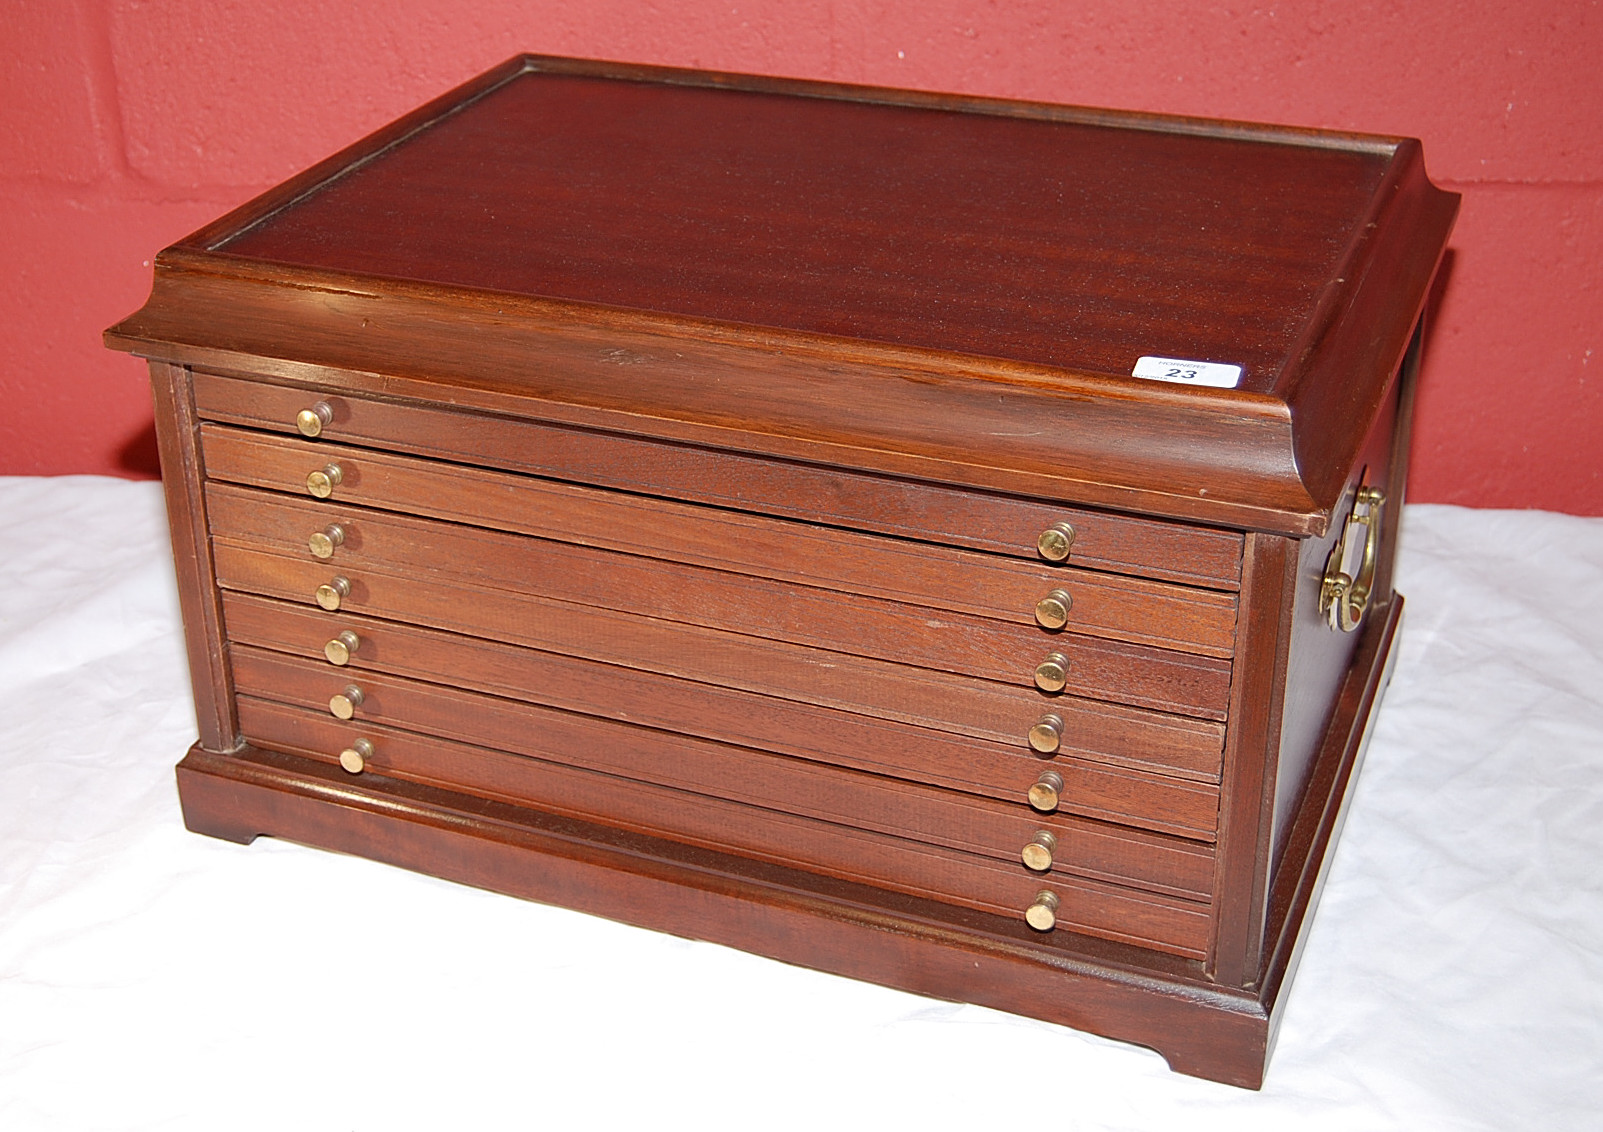 COIN COLLECTORS CABINET IN MAHOGANY